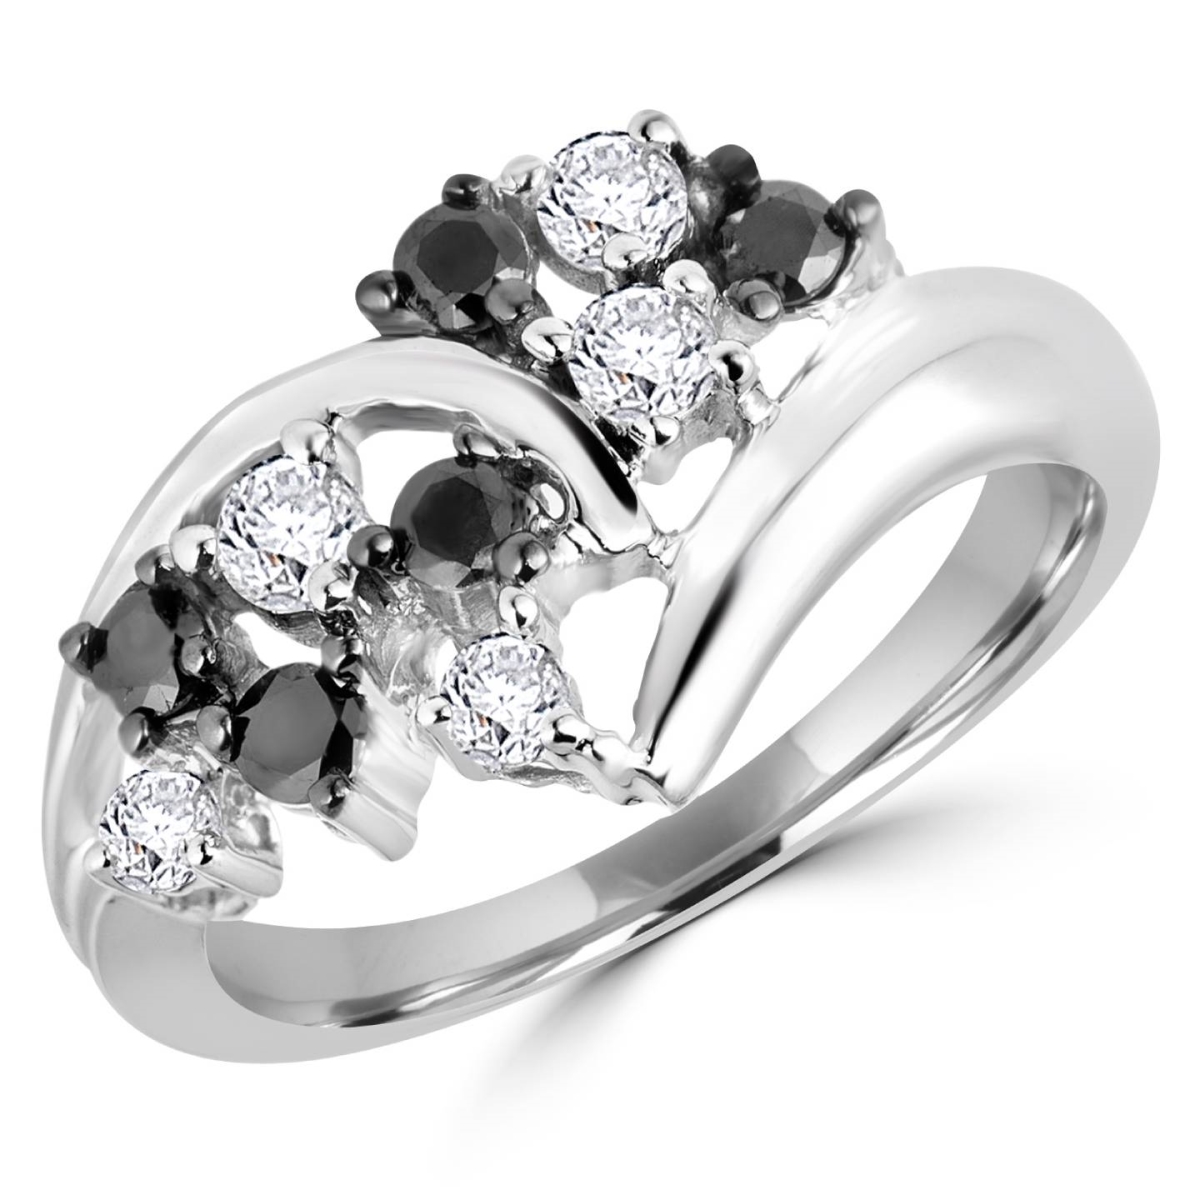 Picture of Majesty Diamonds MDR140090-3 0.5 CTW Black & White Diamond Fashion Cocktail Ring in 14K White Gold - Size 3